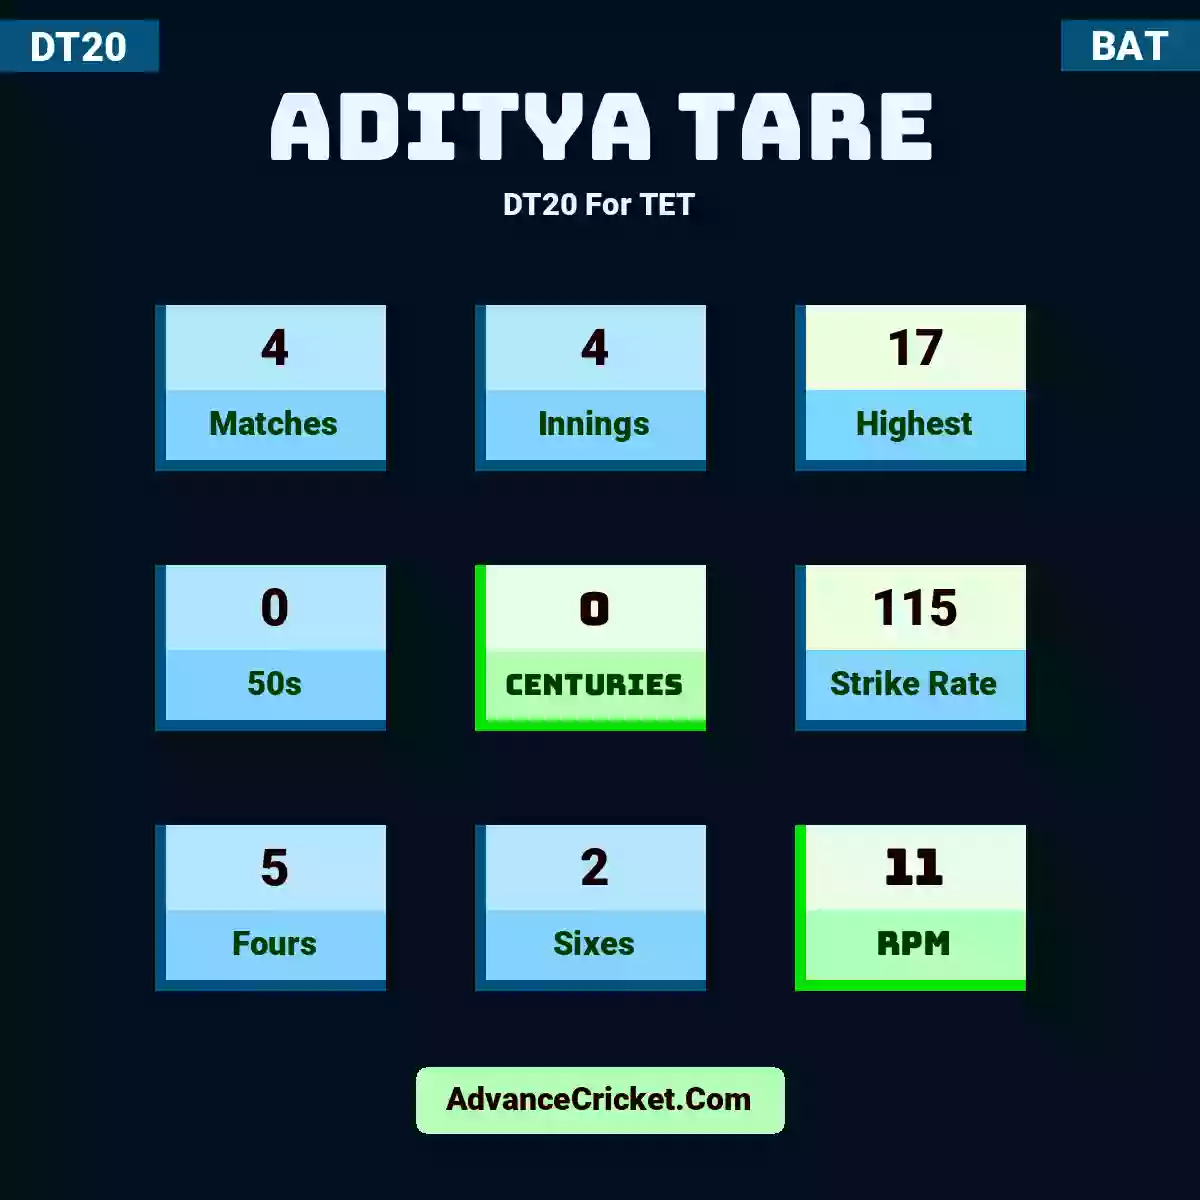 Aditya Tare DT20  For TET, Aditya Tare played 4 matches, scored 17 runs as highest, 0 half-centuries, and 0 centuries, with a strike rate of 115. A.Tare hit 5 fours and 2 sixes, with an RPM of 11.